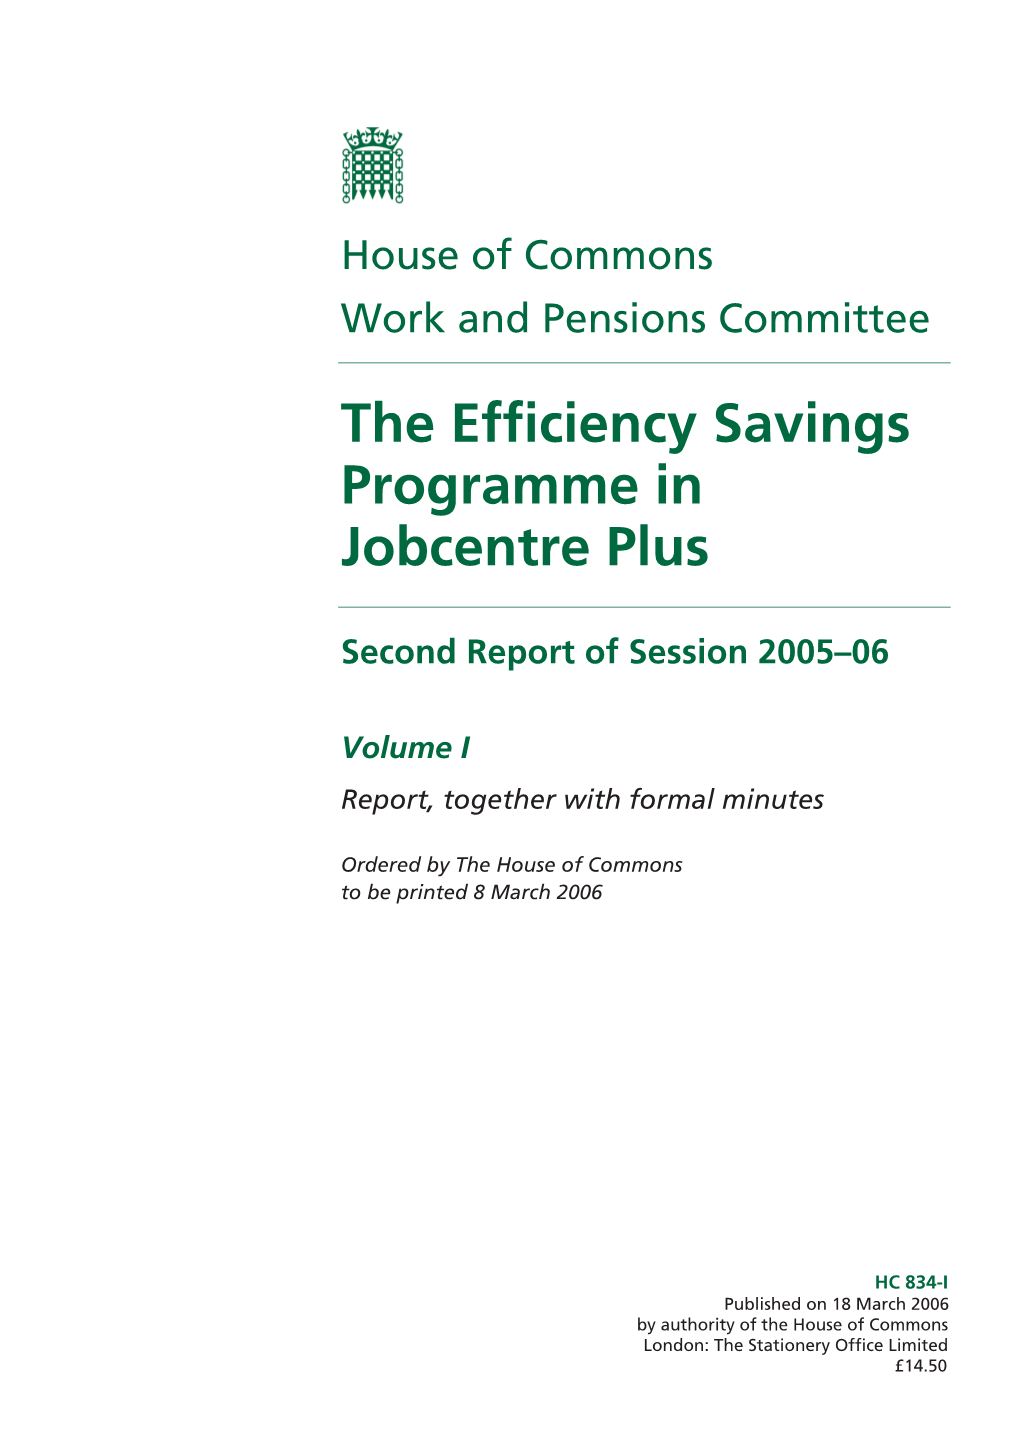 The Efficiency Savings Programme in Jobcentre Plus